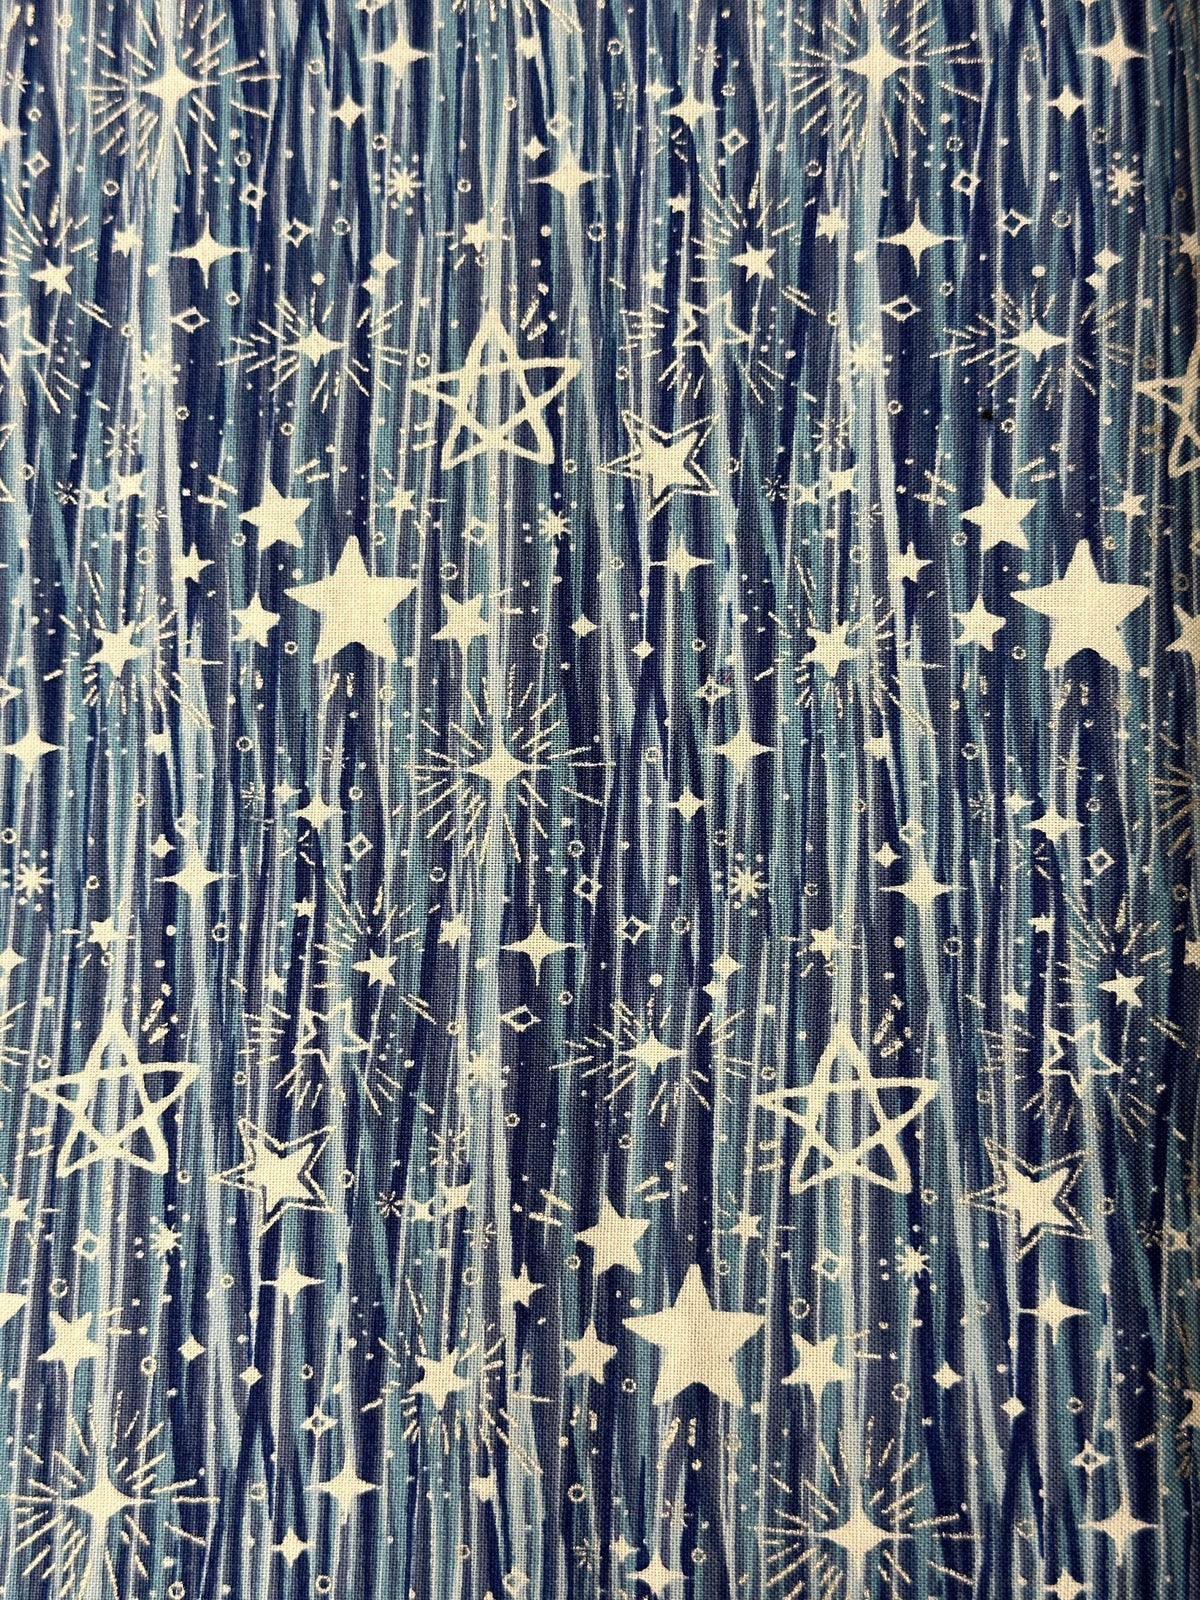 A blue and white Starry Night Fancy Square Dance Skirt fabric, perfect for creating a circle skirt for your square dance outfit by Square Up Fashions.